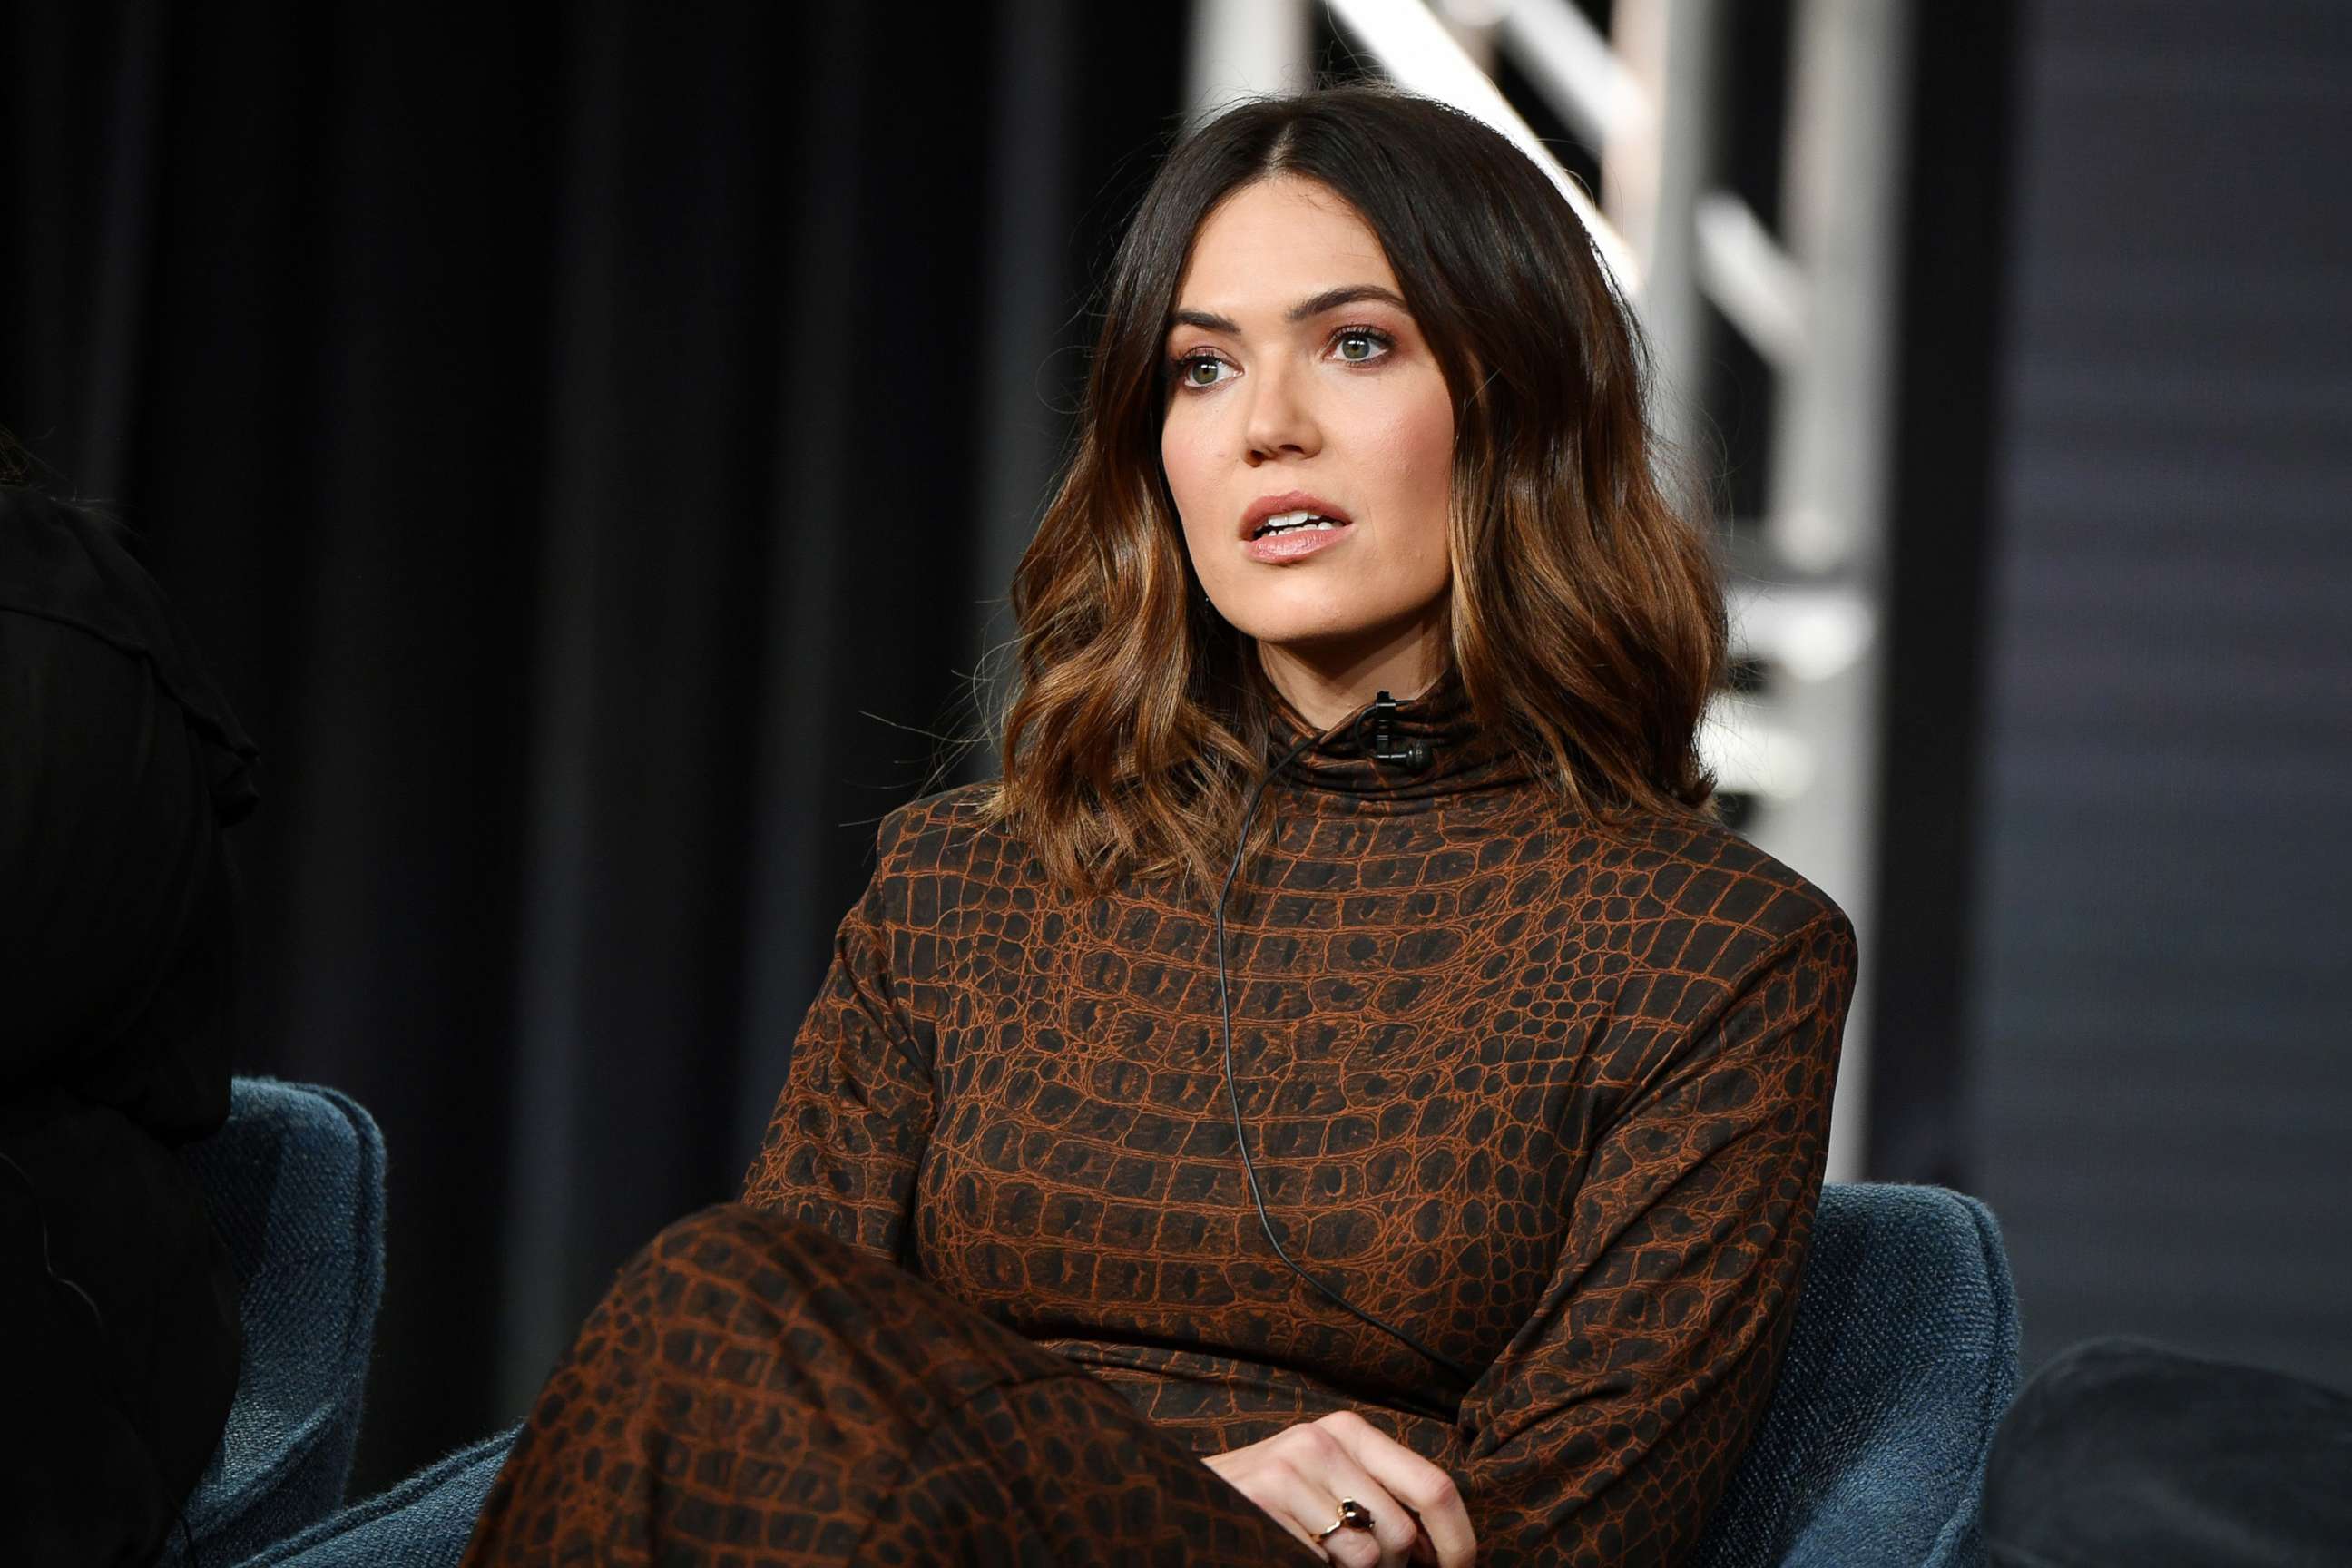 PHOTO: Mandy Moore speaks during the 2020 Winter TCA Press Tour on Jan. 11, 2020, in Pasadena, Calif.